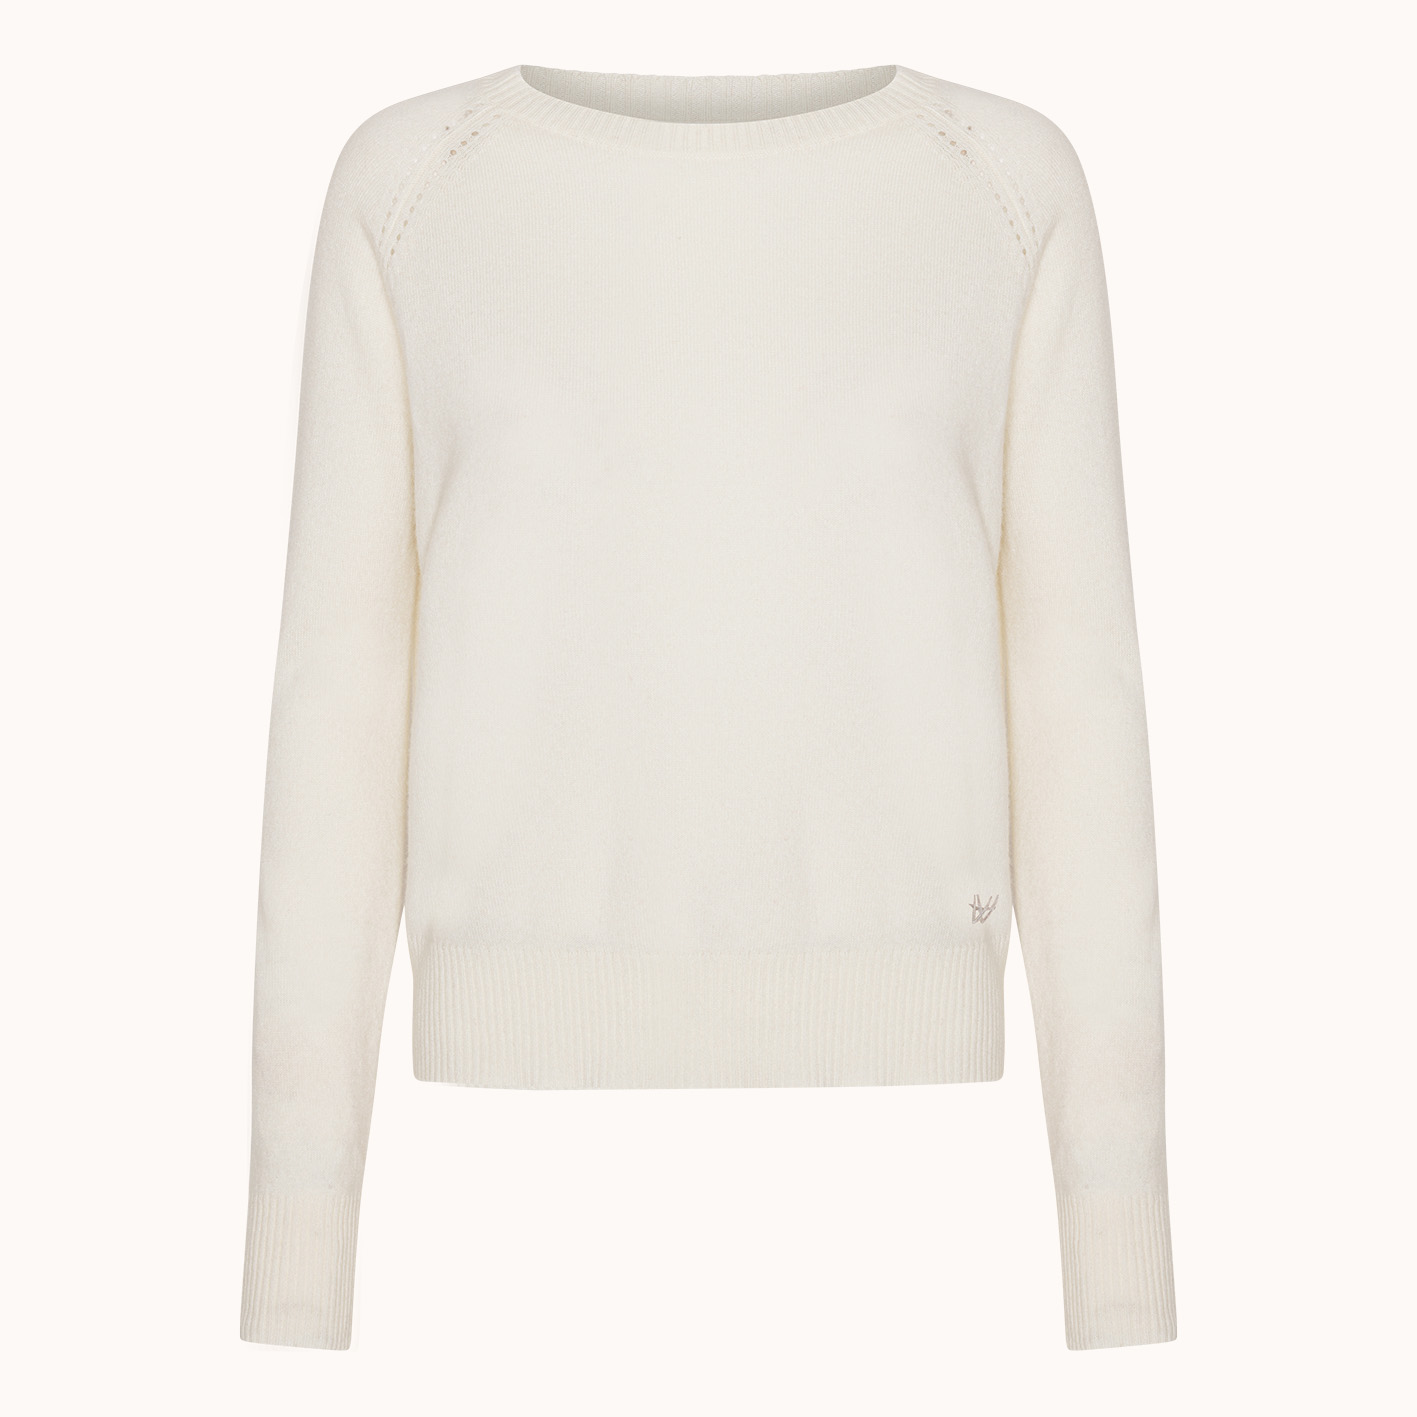 Pearl detailed cashmere sweater from Wuth Copenhagen. 100% superior cashmere sweater.